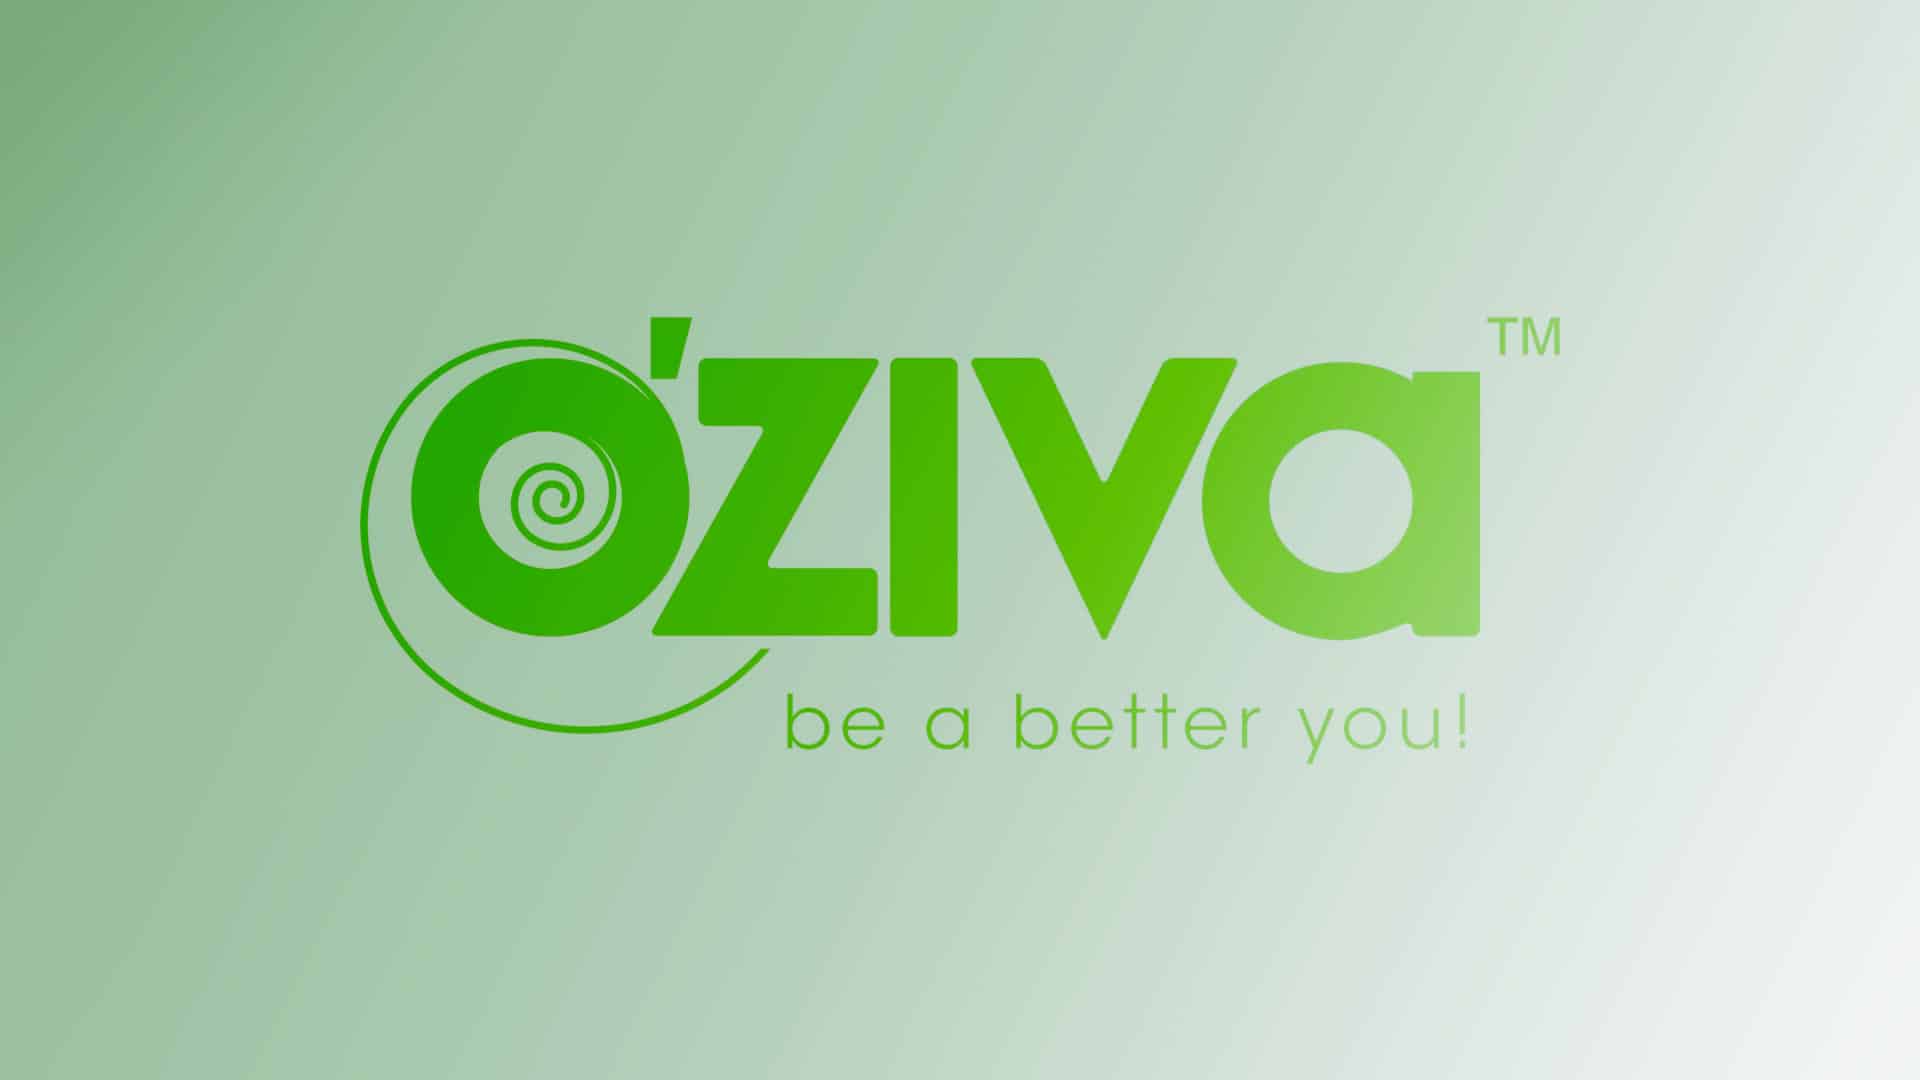 OZiva expands nutritional product range, to provide plant-based vitamins and minerals to build immunity